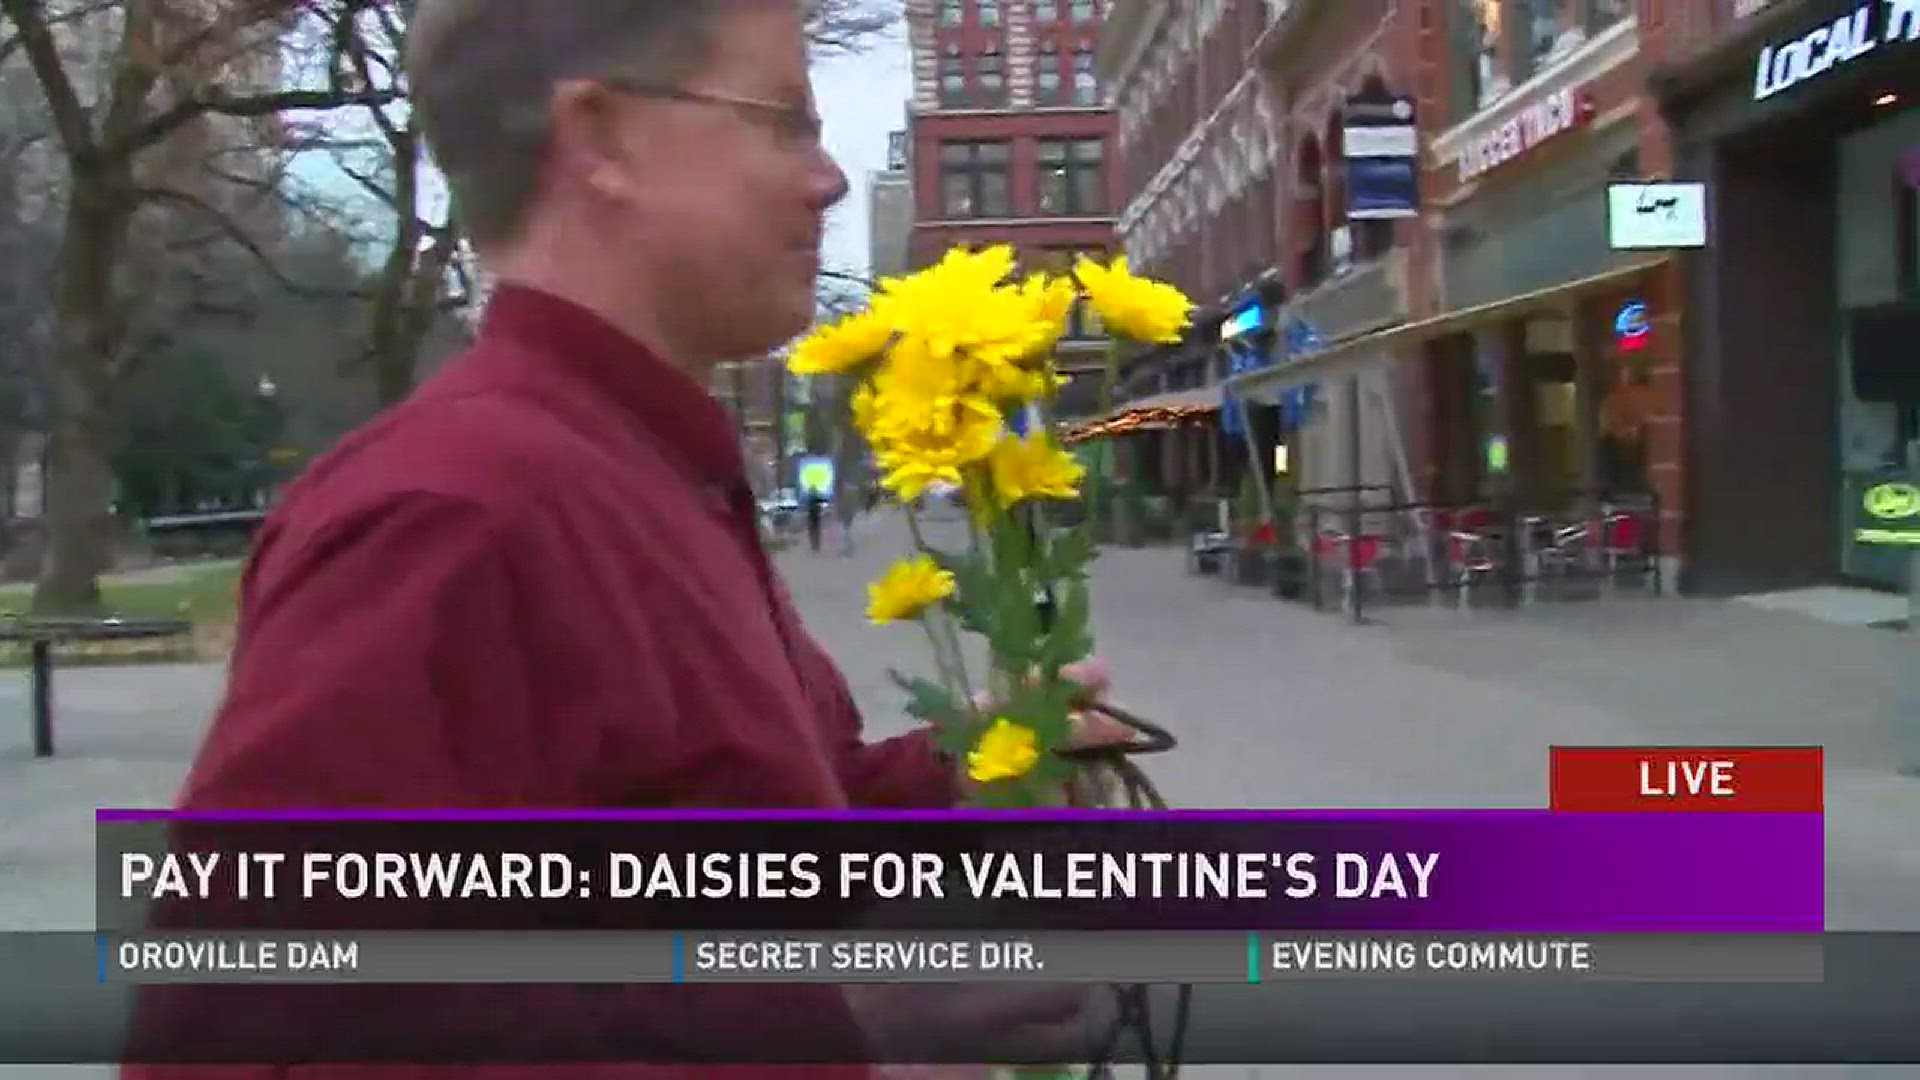 Meterologist Todd Howell is handing out daisies in Market Square.